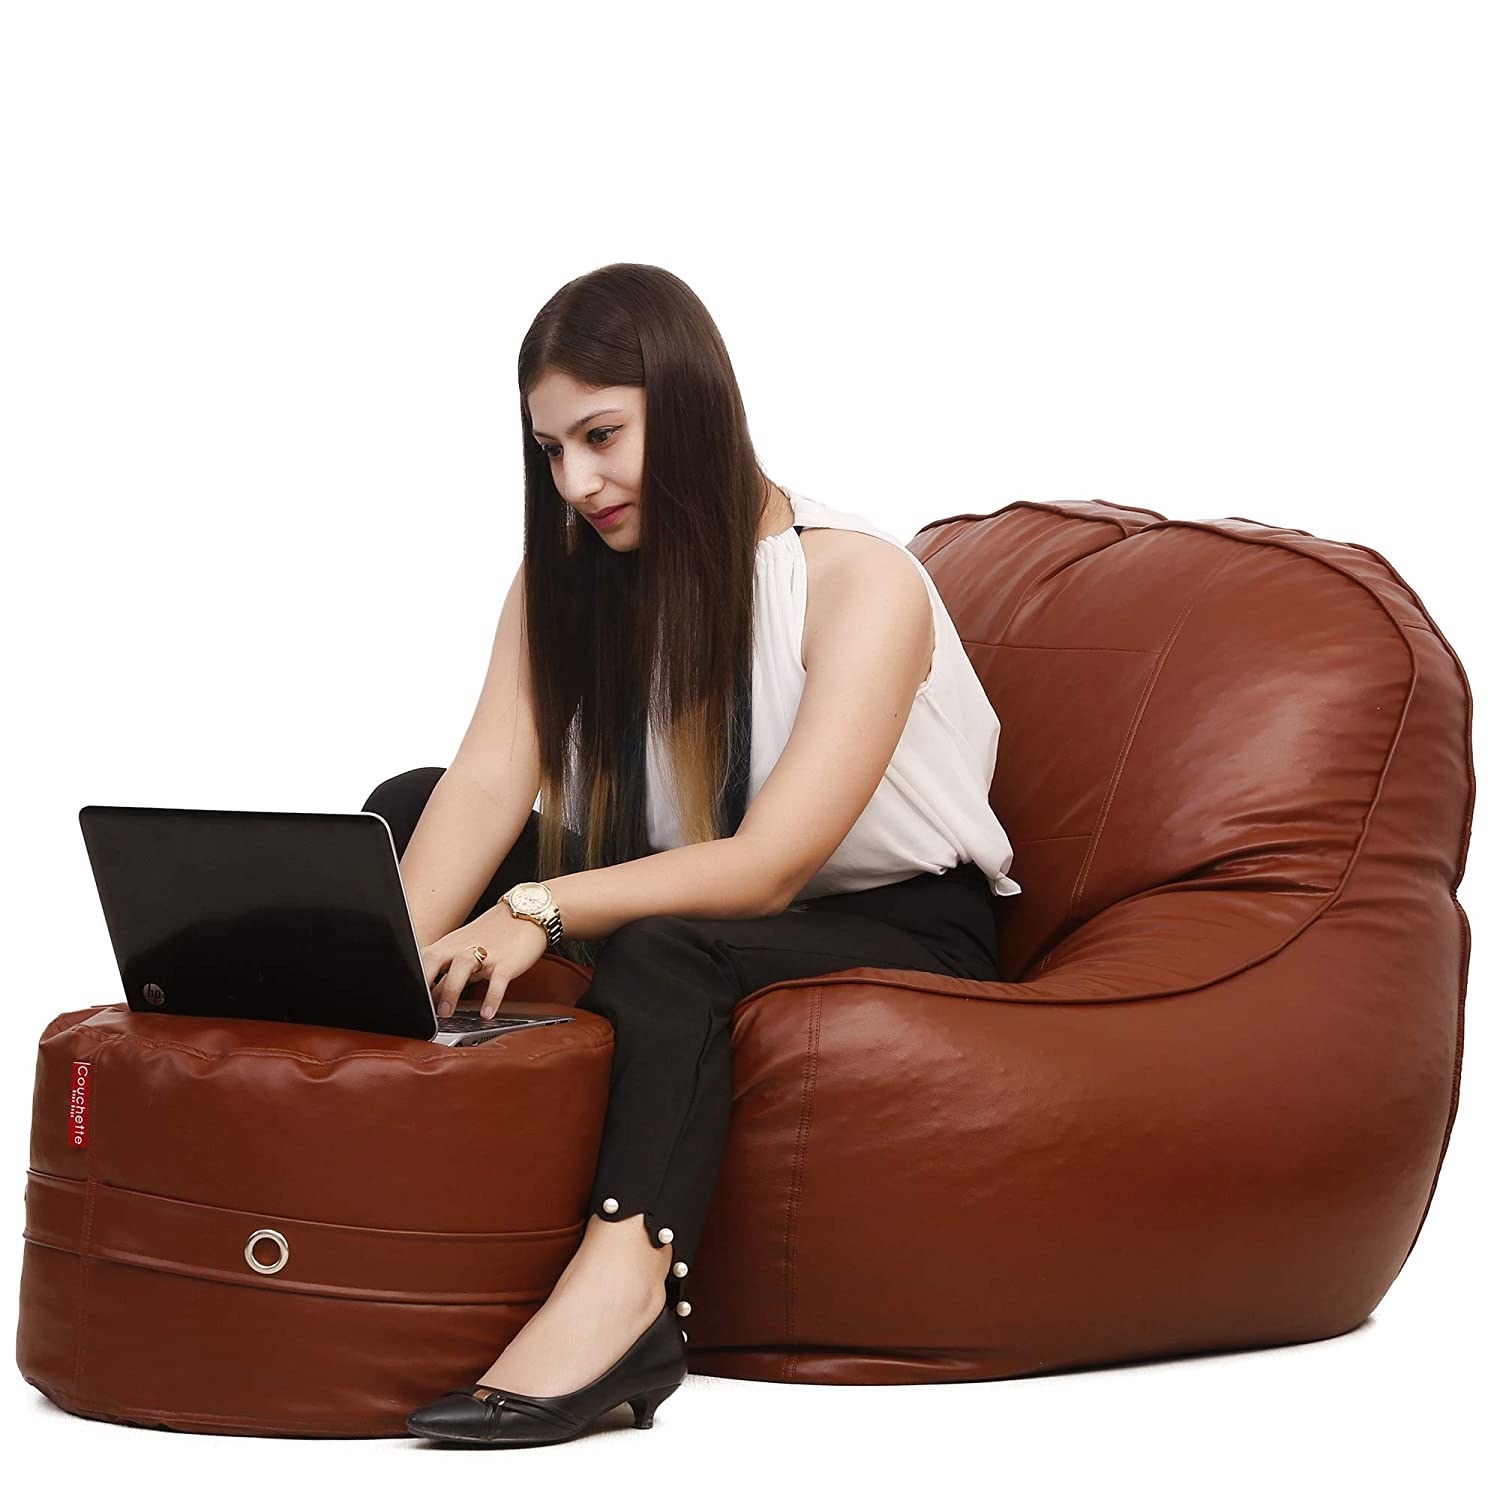 Woman working while sitting on the bean bag, with her laptop on the footrest.